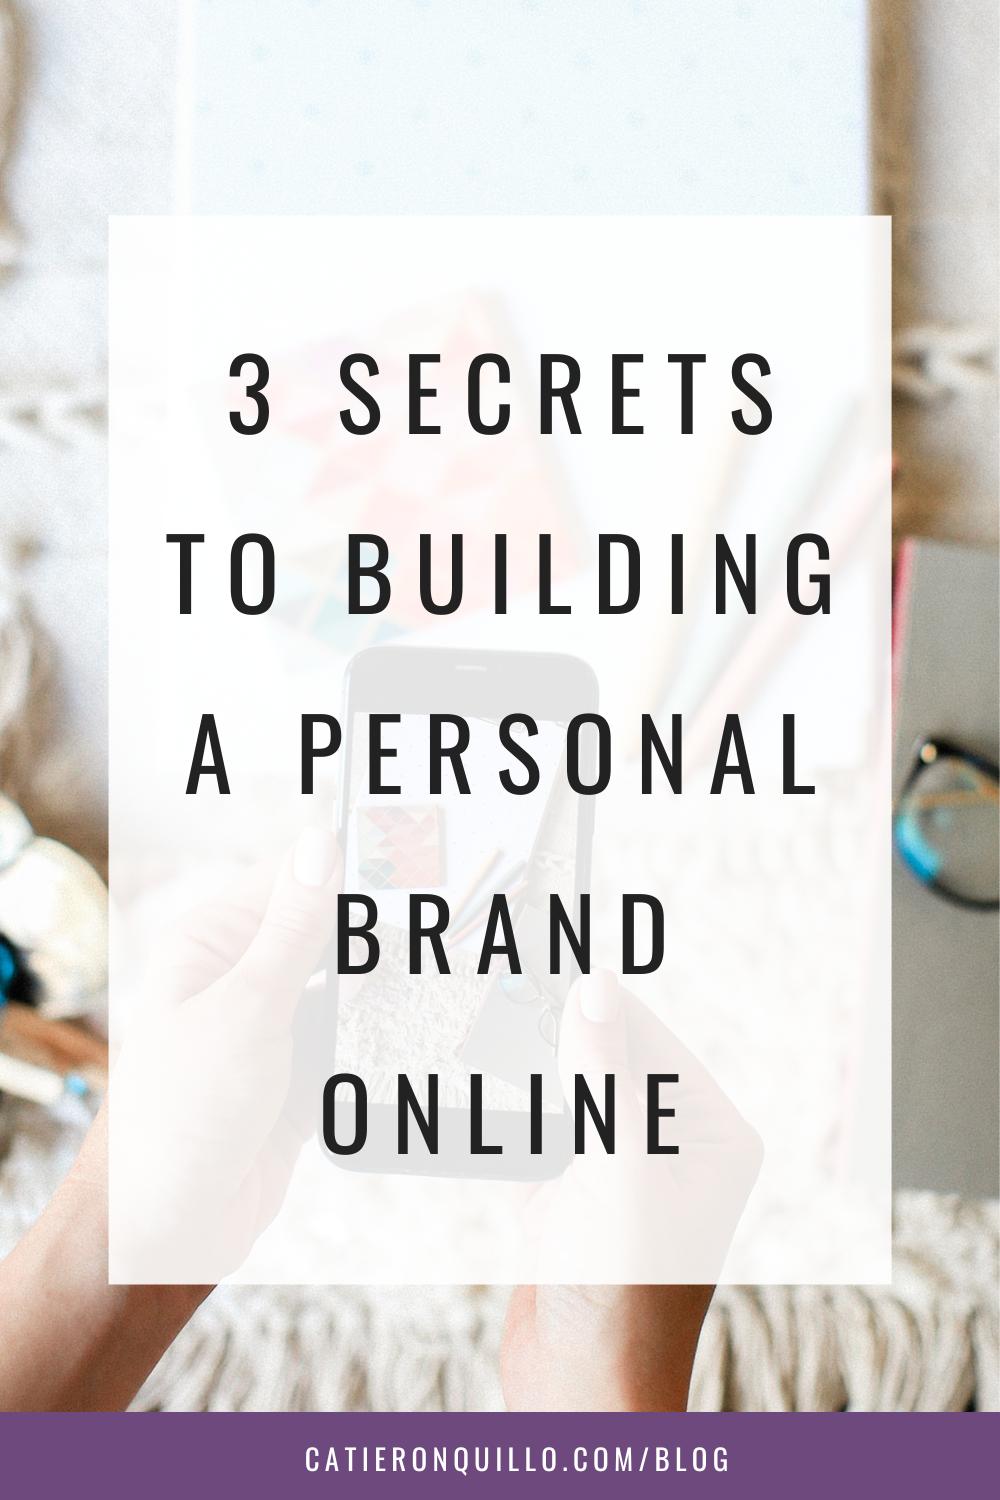 3 secrets to building a personal brand online